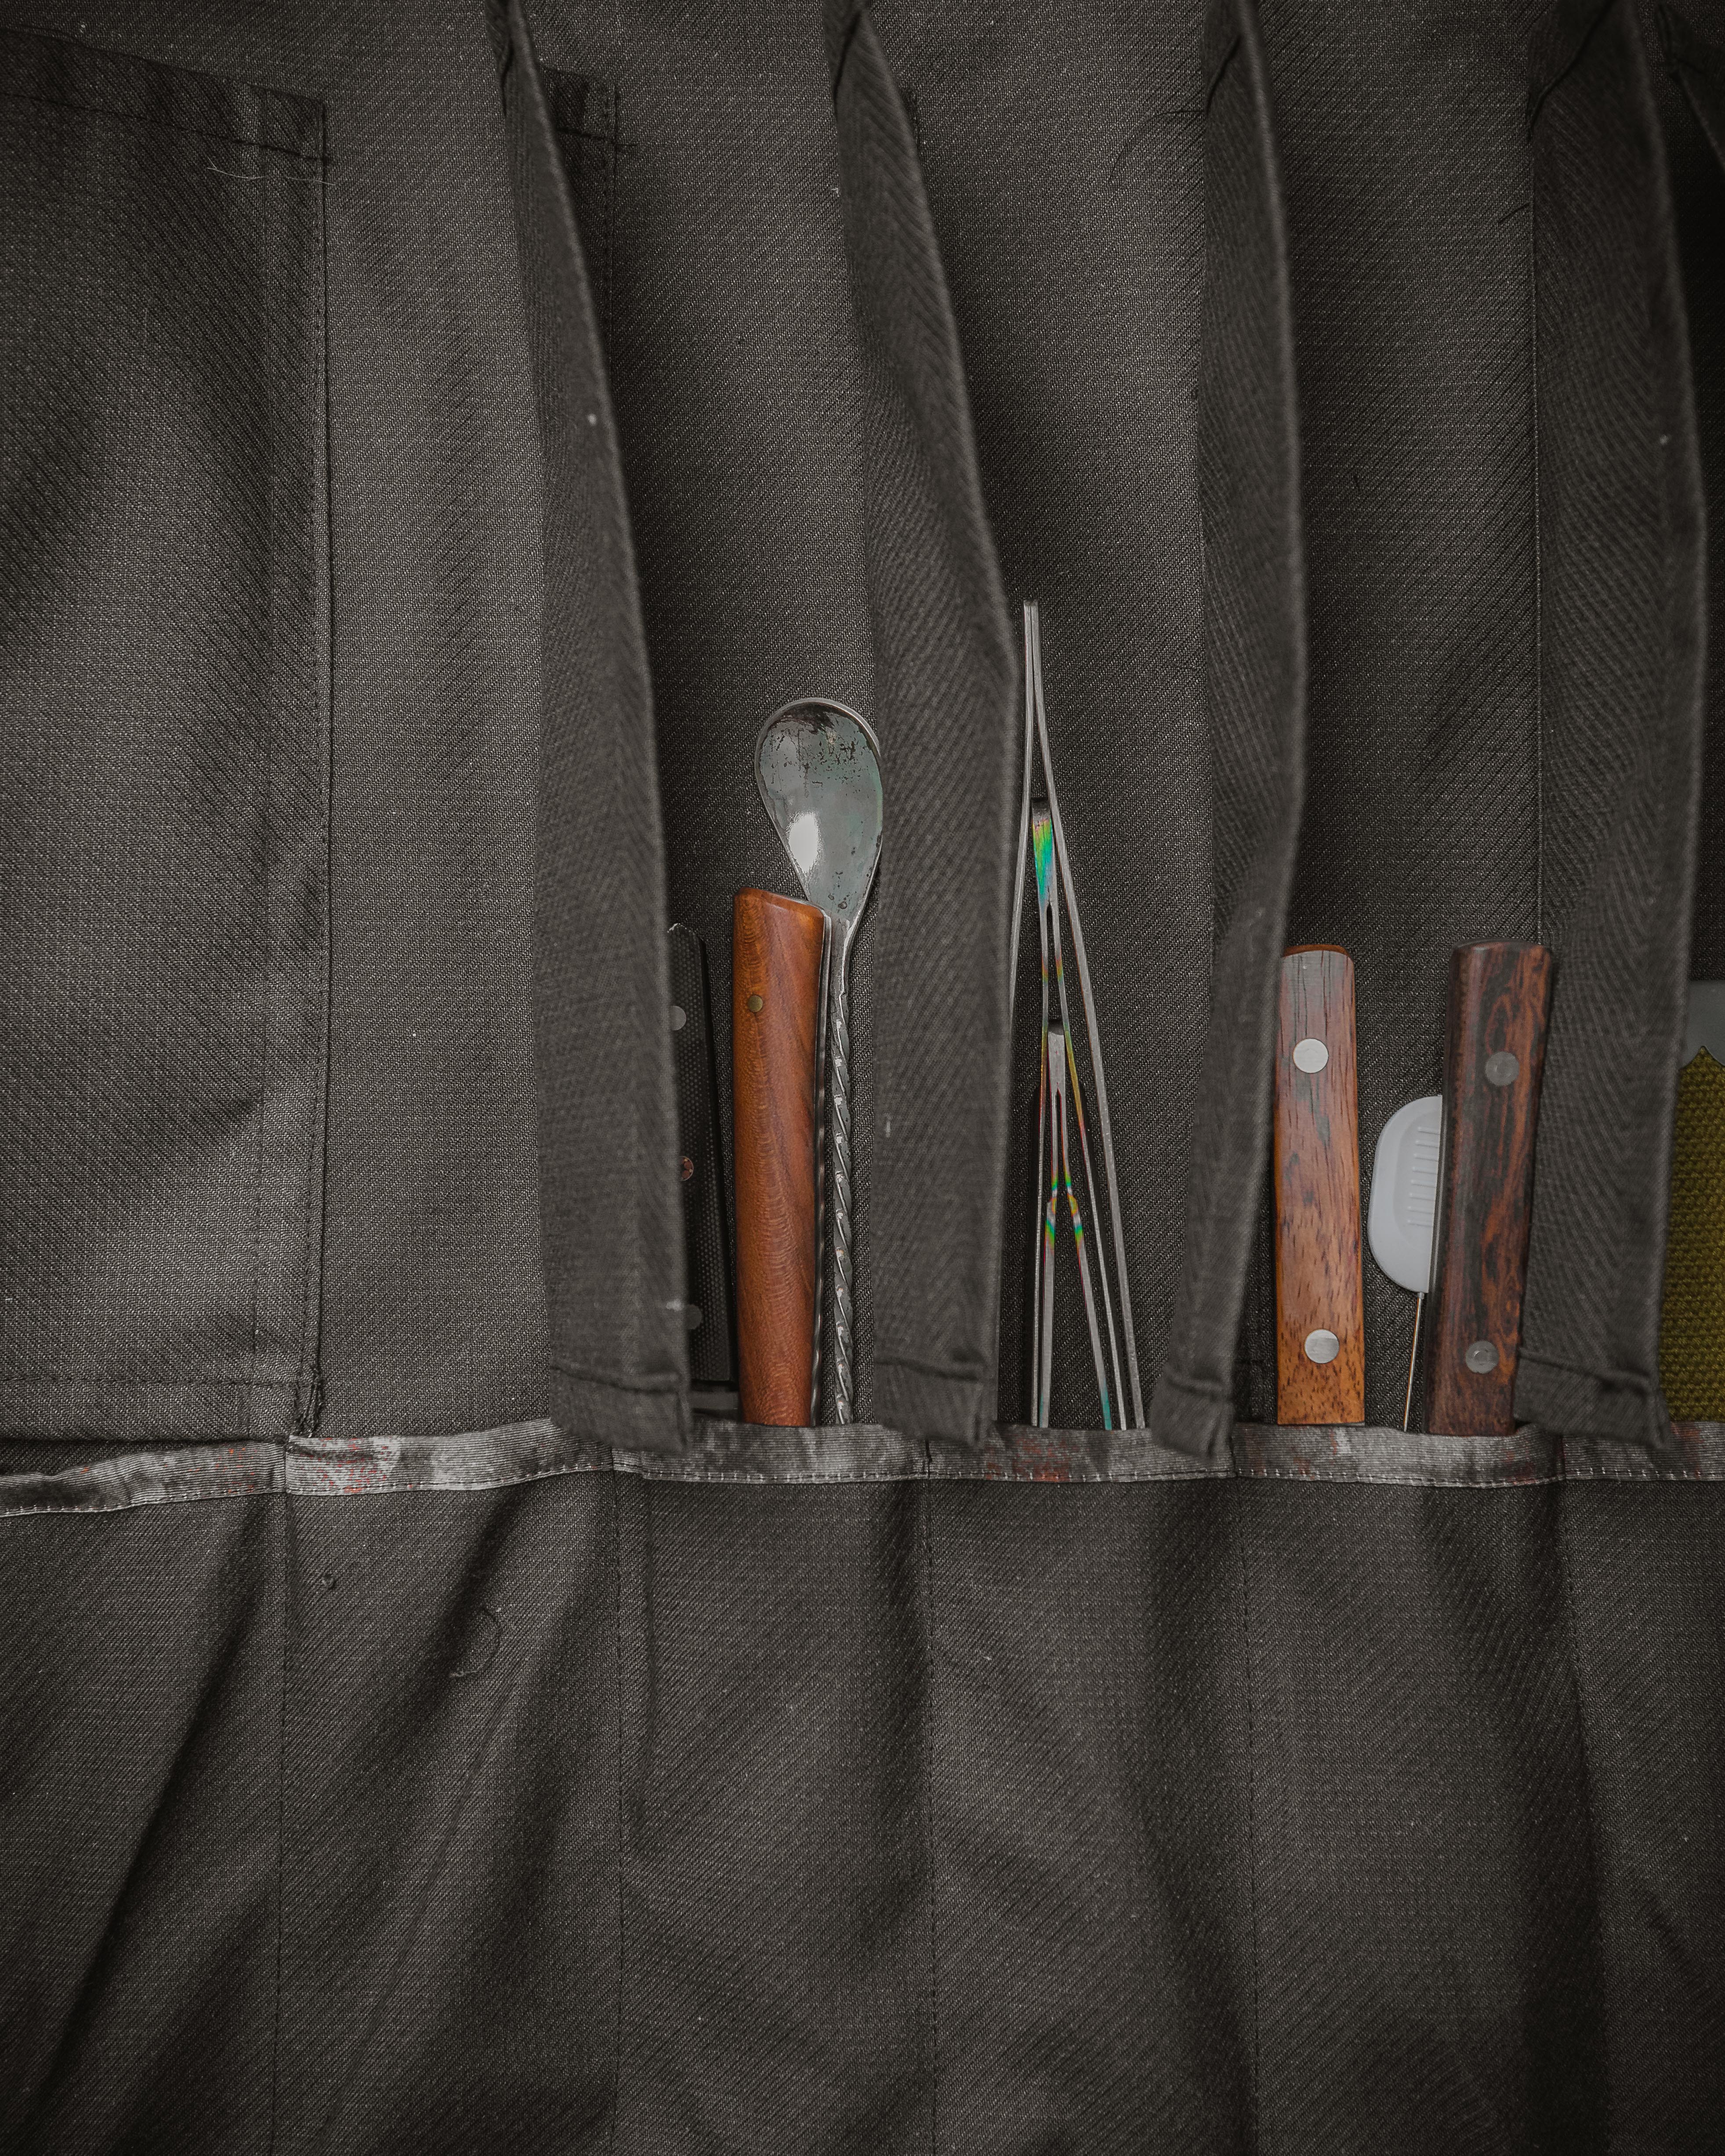 Product shot of the Main Squeeze interior with many knives and other utensils in its pockets. Designed in Minnesota by Craftmade Aprons.